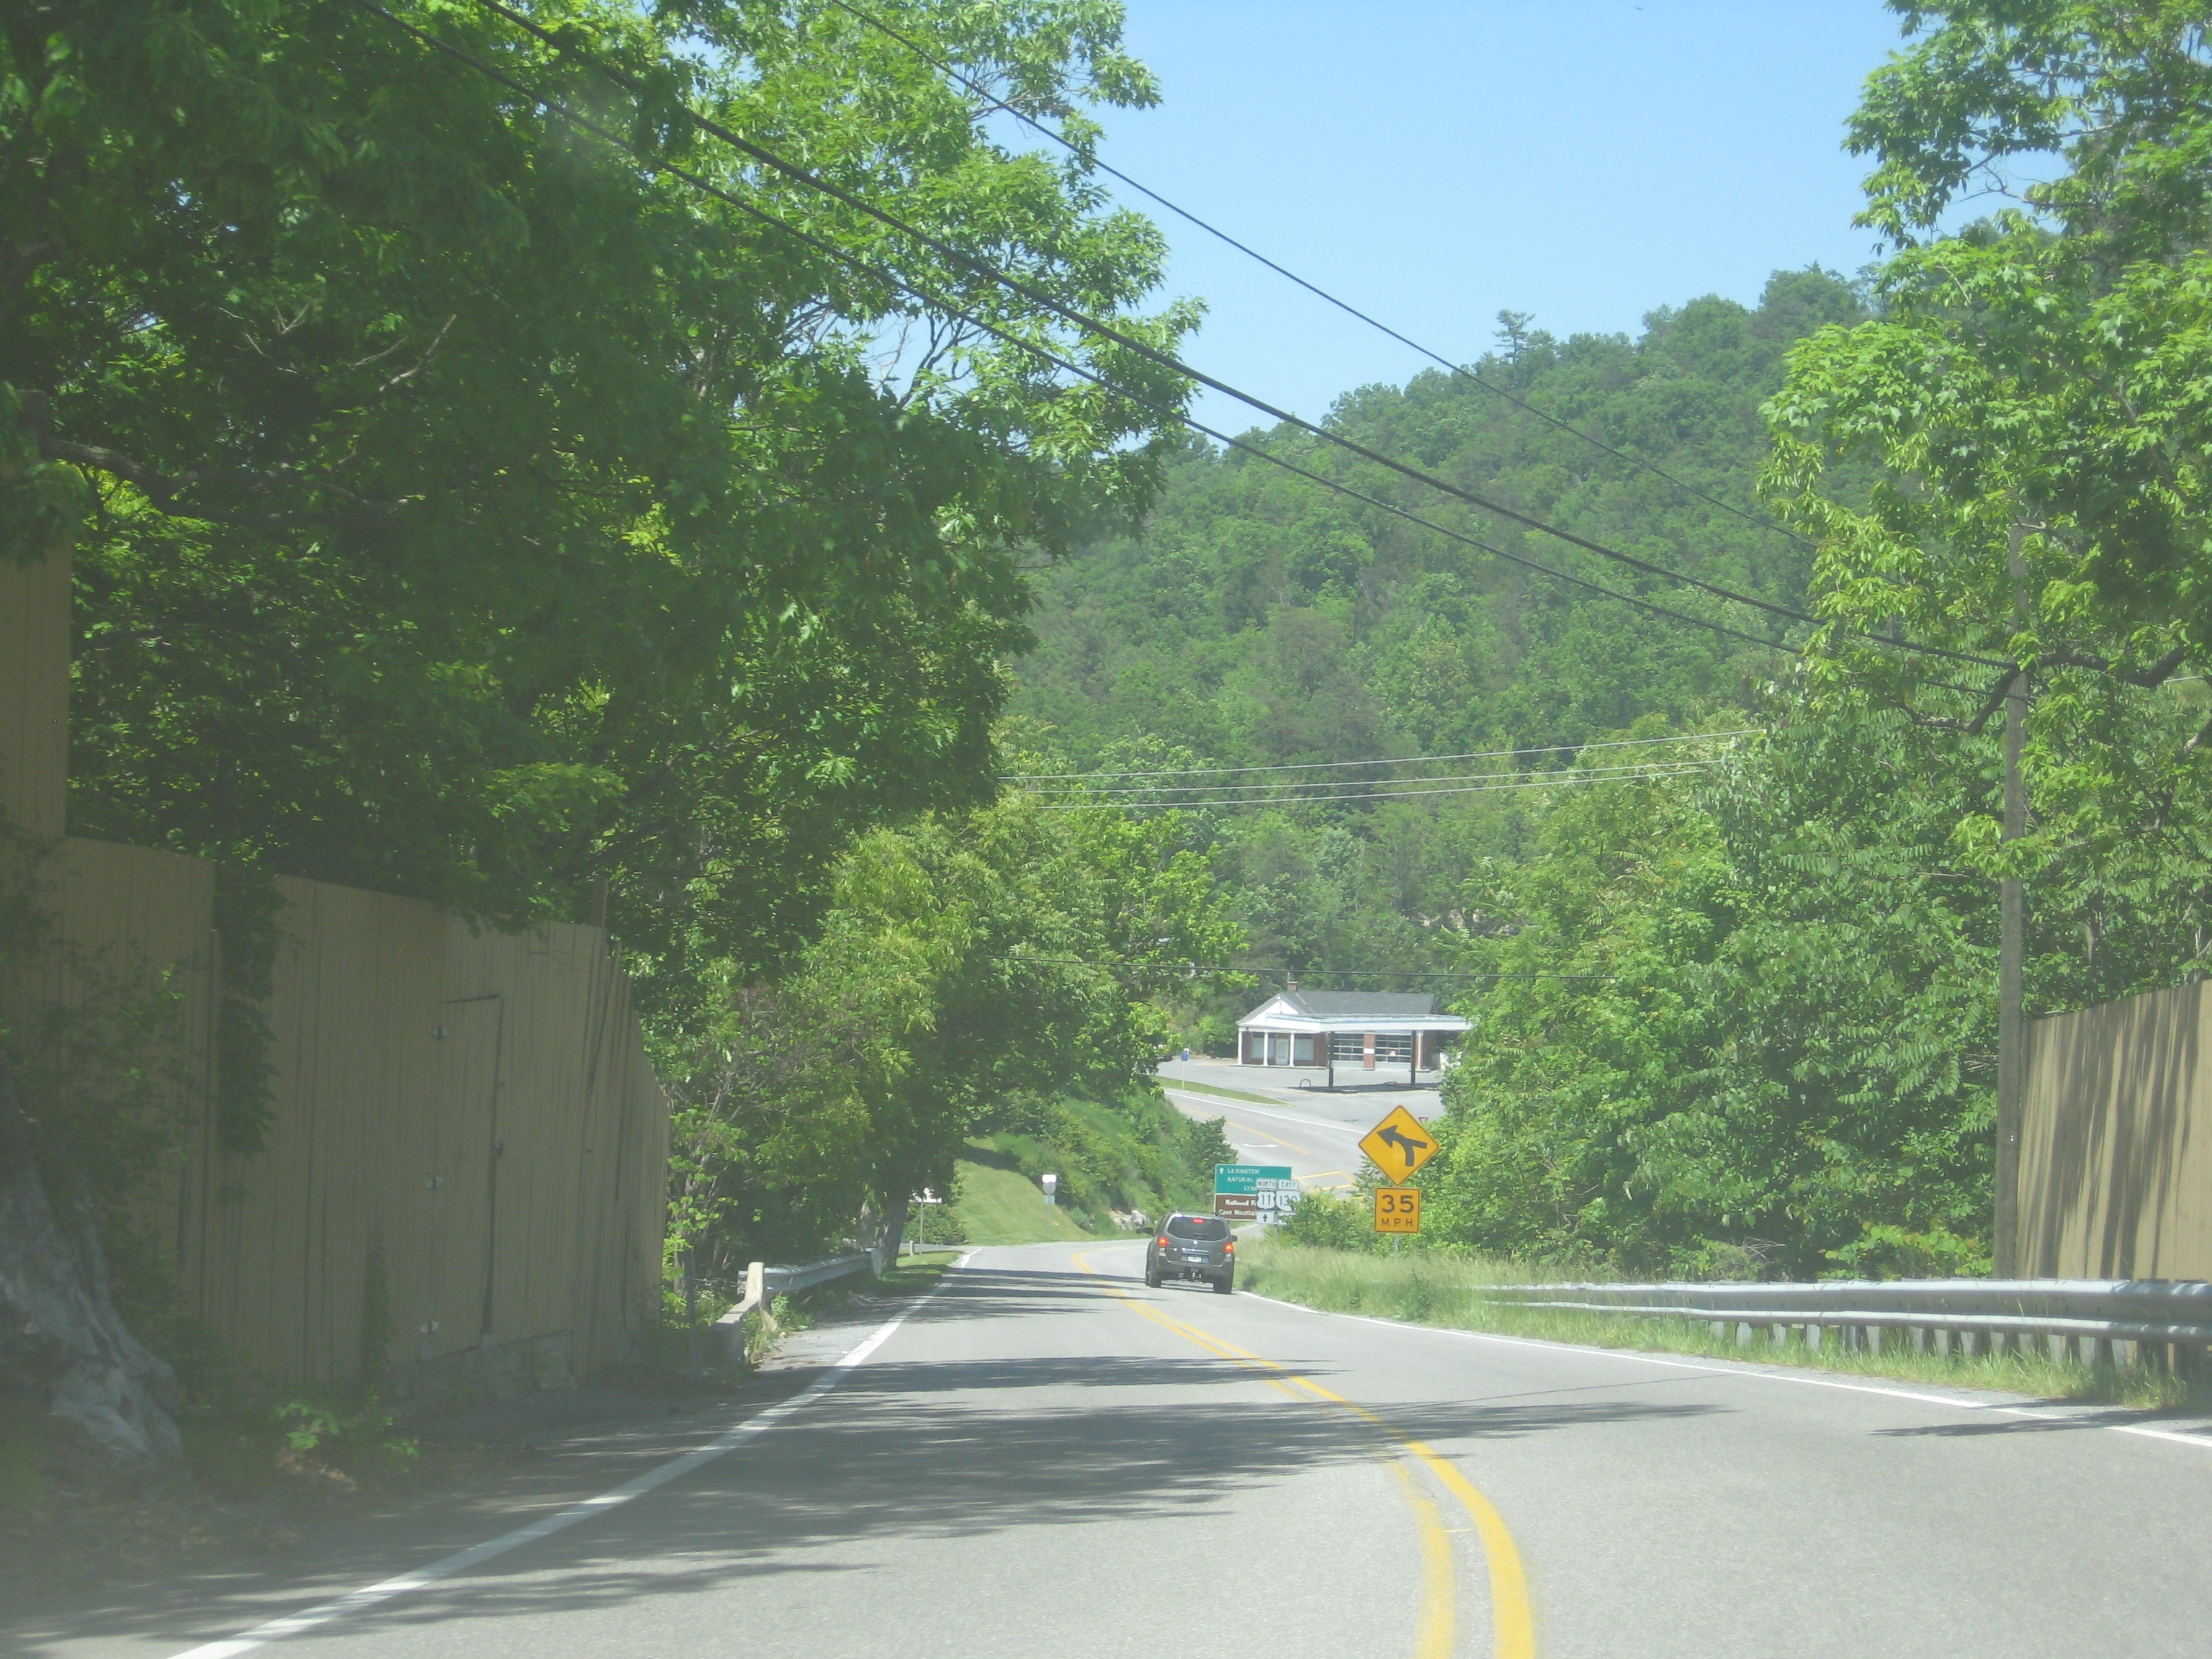 Photo of Route 11 as it goes over Natural Bridge.